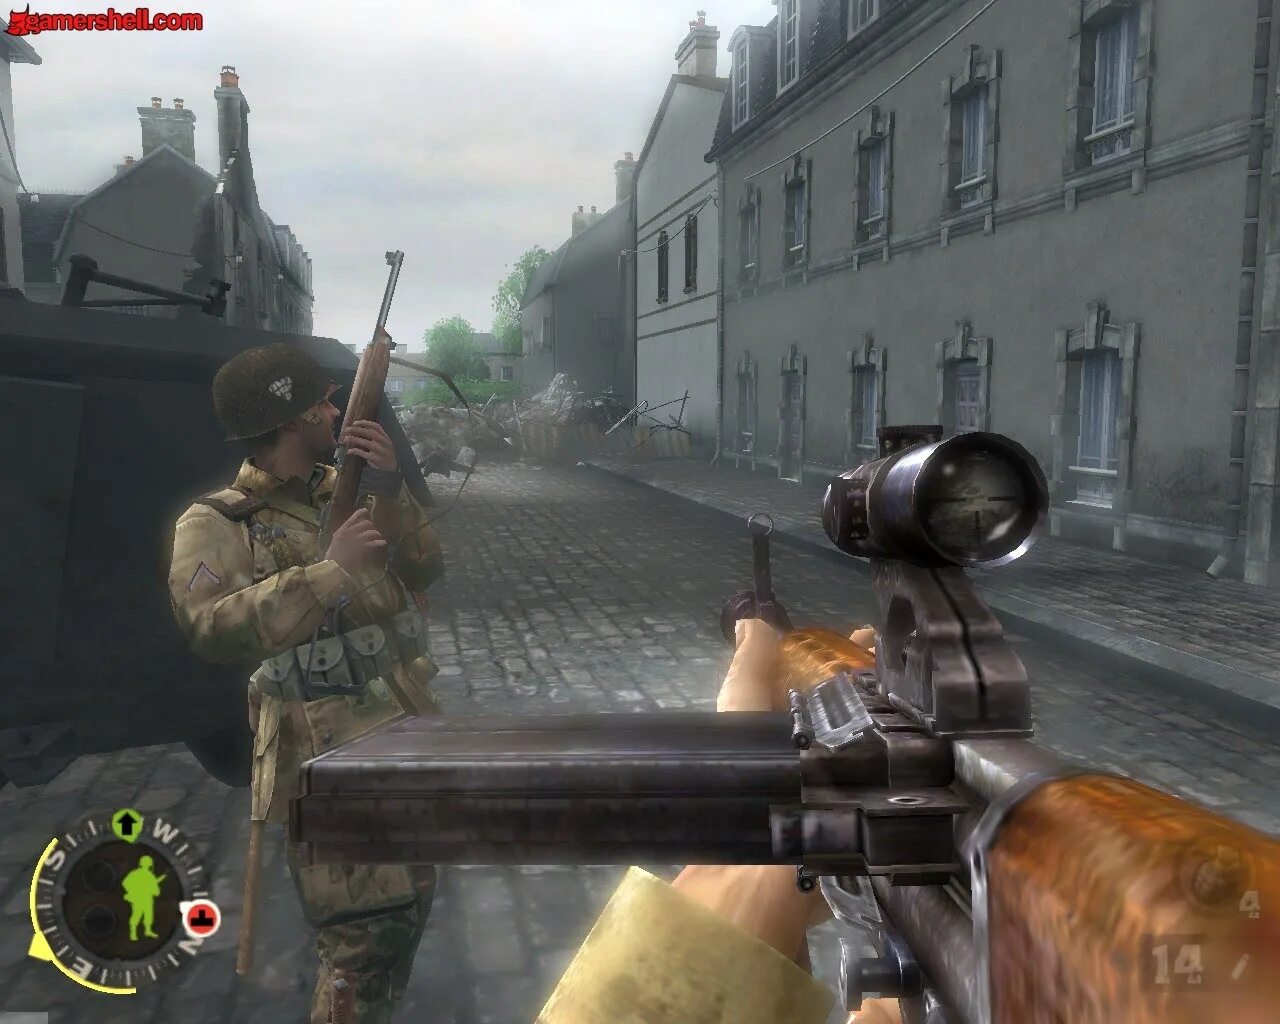 Игра brothers in Arms earned in Blood. Игра brothers in Arms 1. Brothers in Arms: earned in Blood (2005). Brothers in Arms 2005. Старая игра про стрелялки